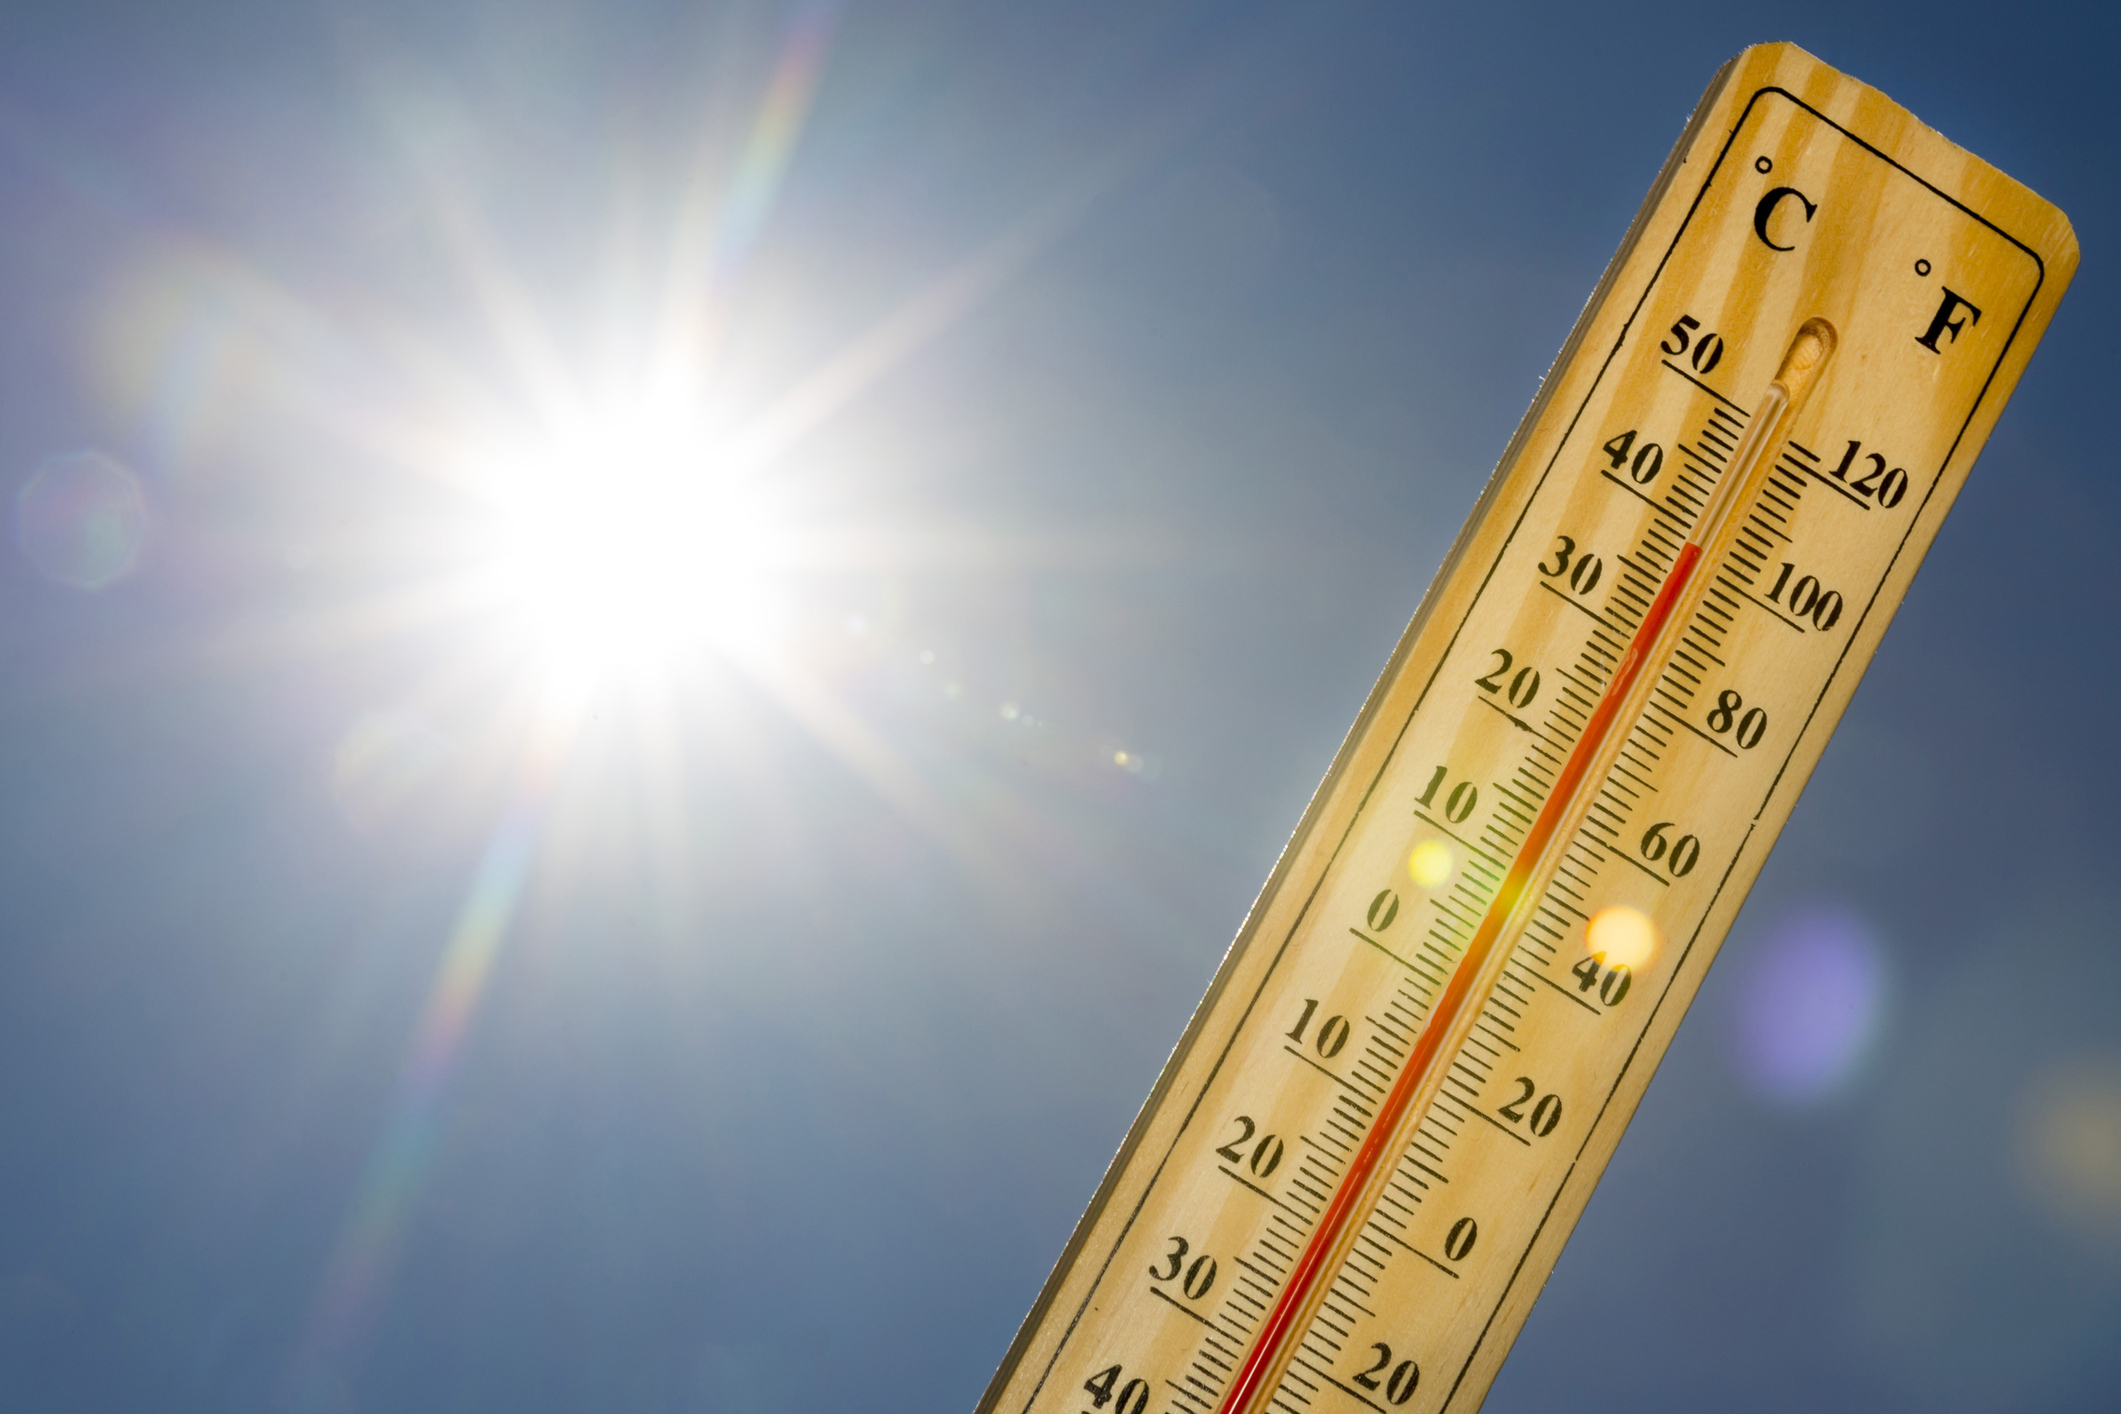 Romania sees historically high temperatures in February